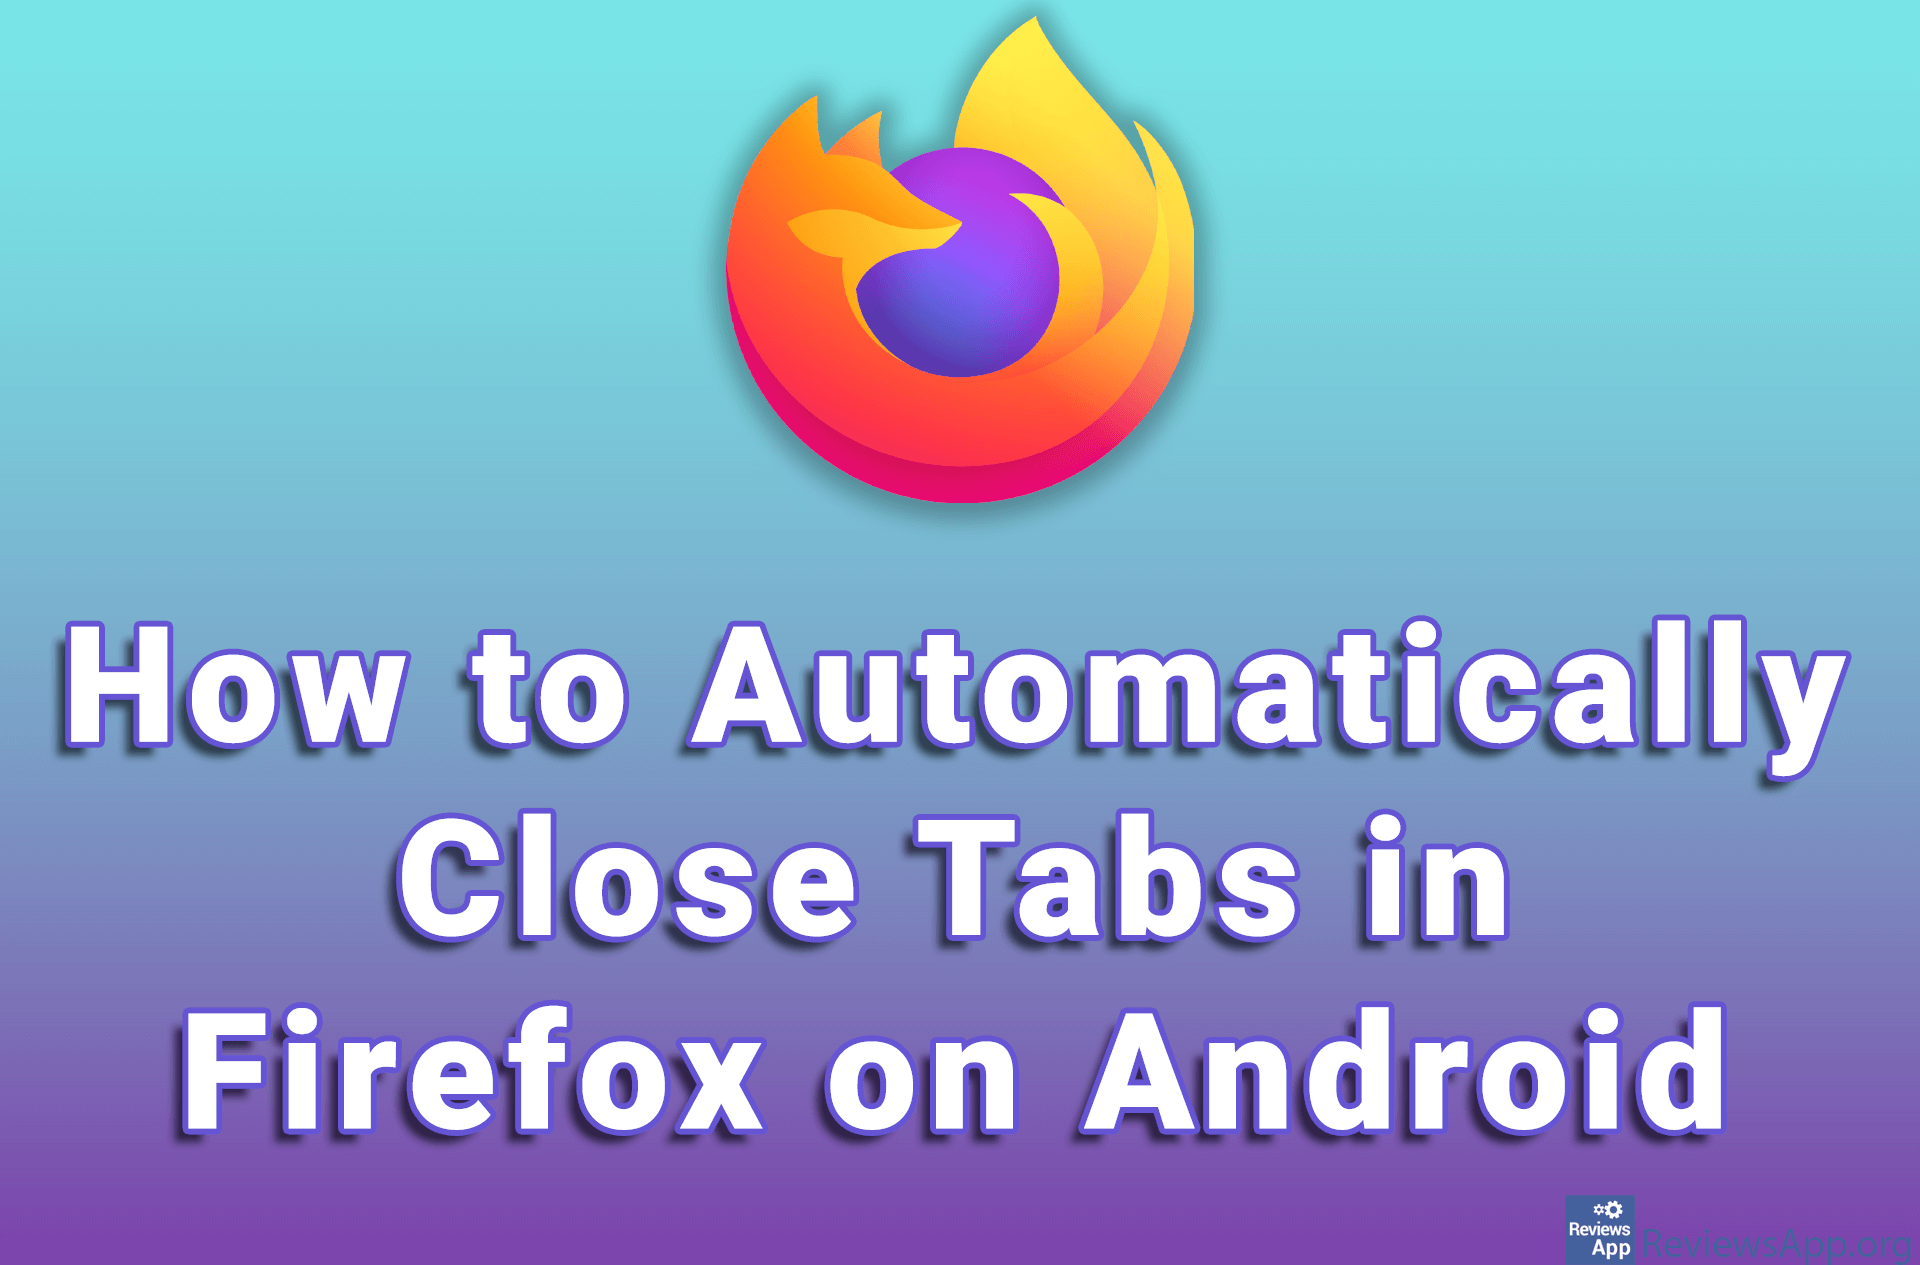 How to Automatically Close Tabs in Firefox on Android